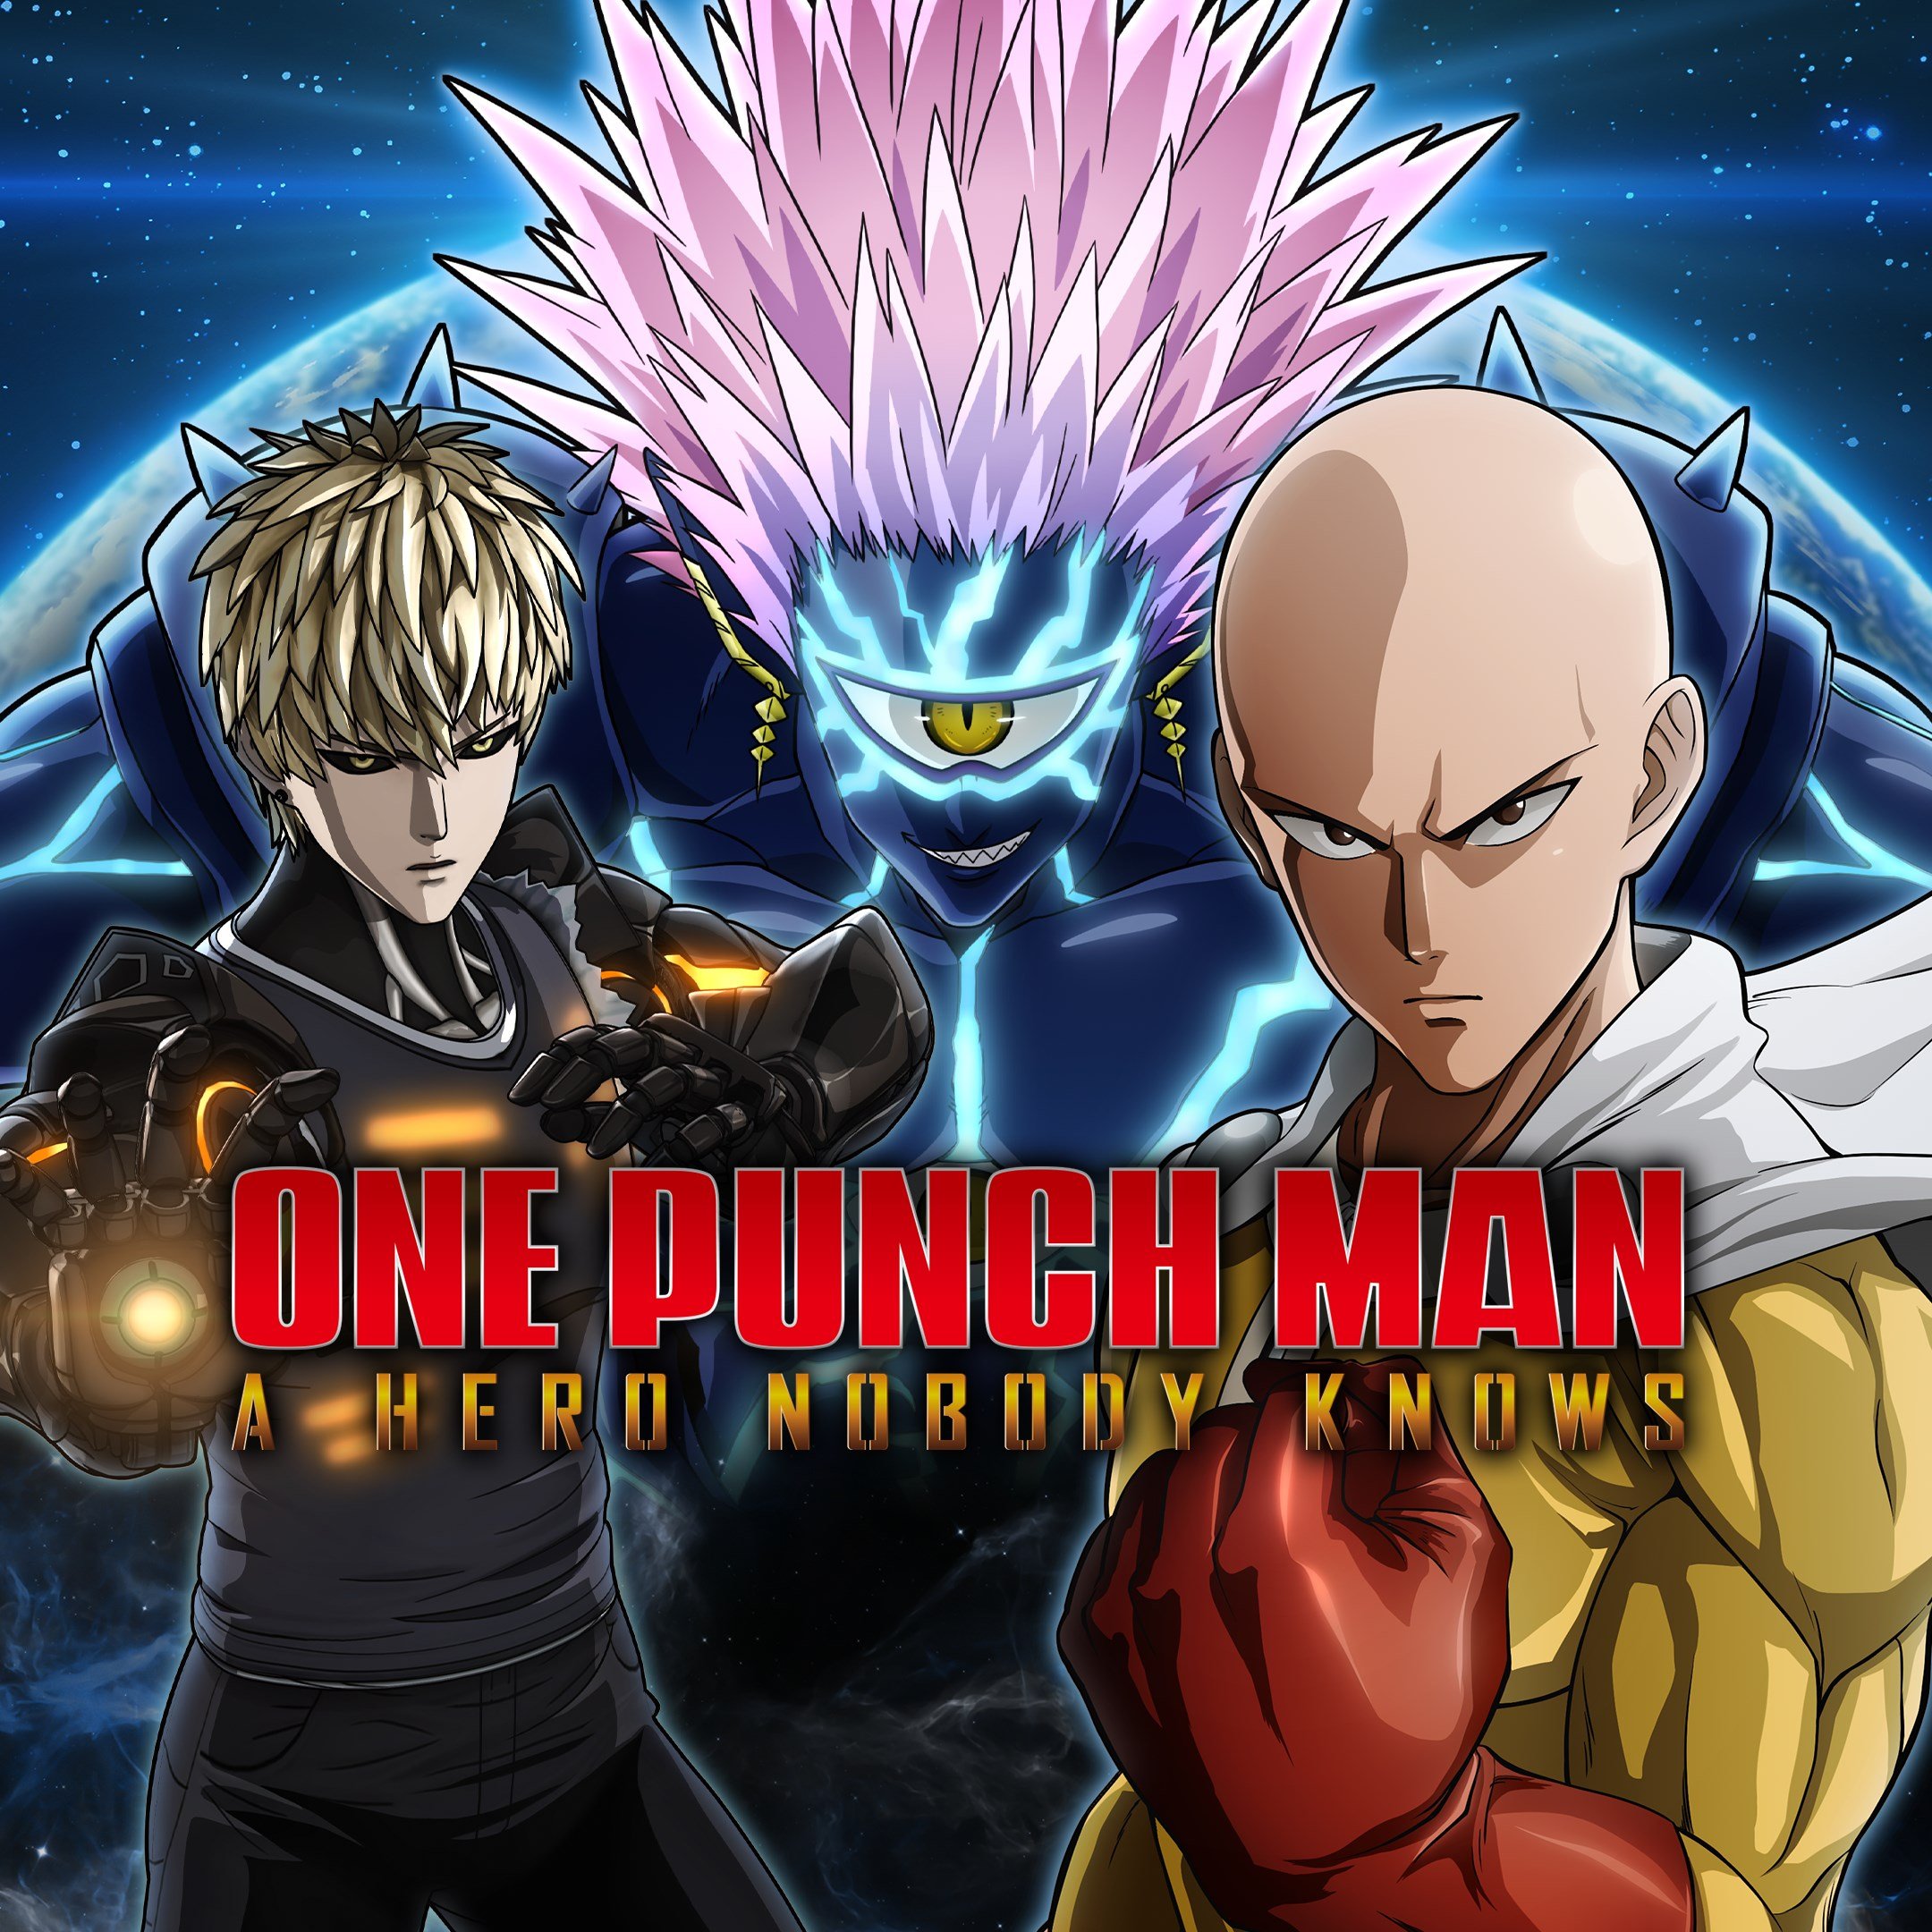 Boxart for ONE PUNCH MAN: A HERO NOBODY KNOWS